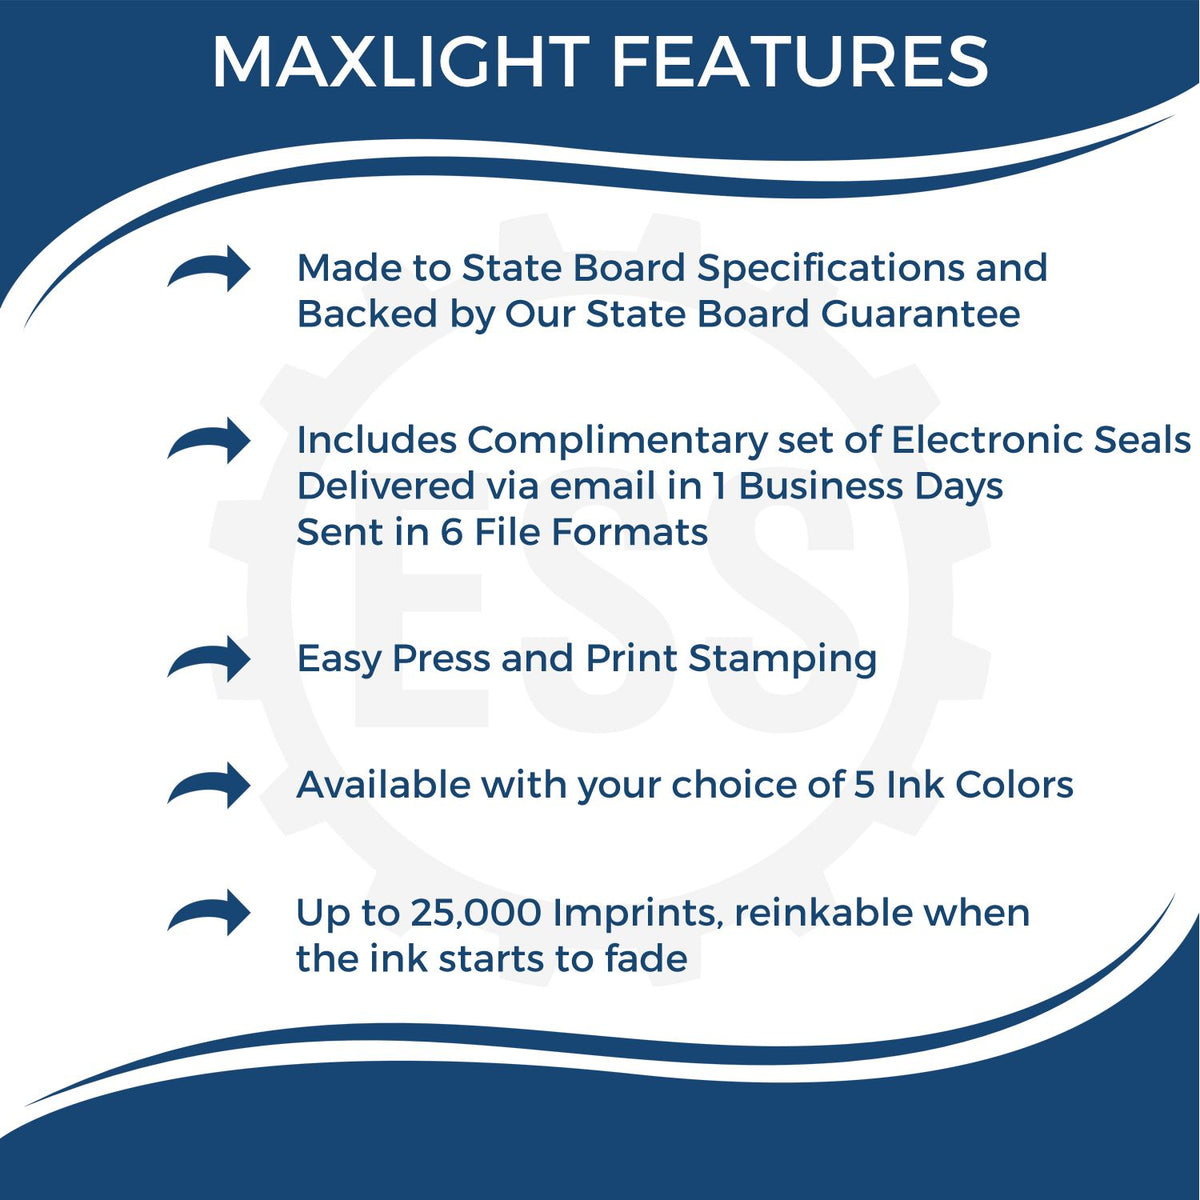 A picture of an infographic highlighting the selling points for the Premium MaxLight Pre-Inked New York Engineering Stamp